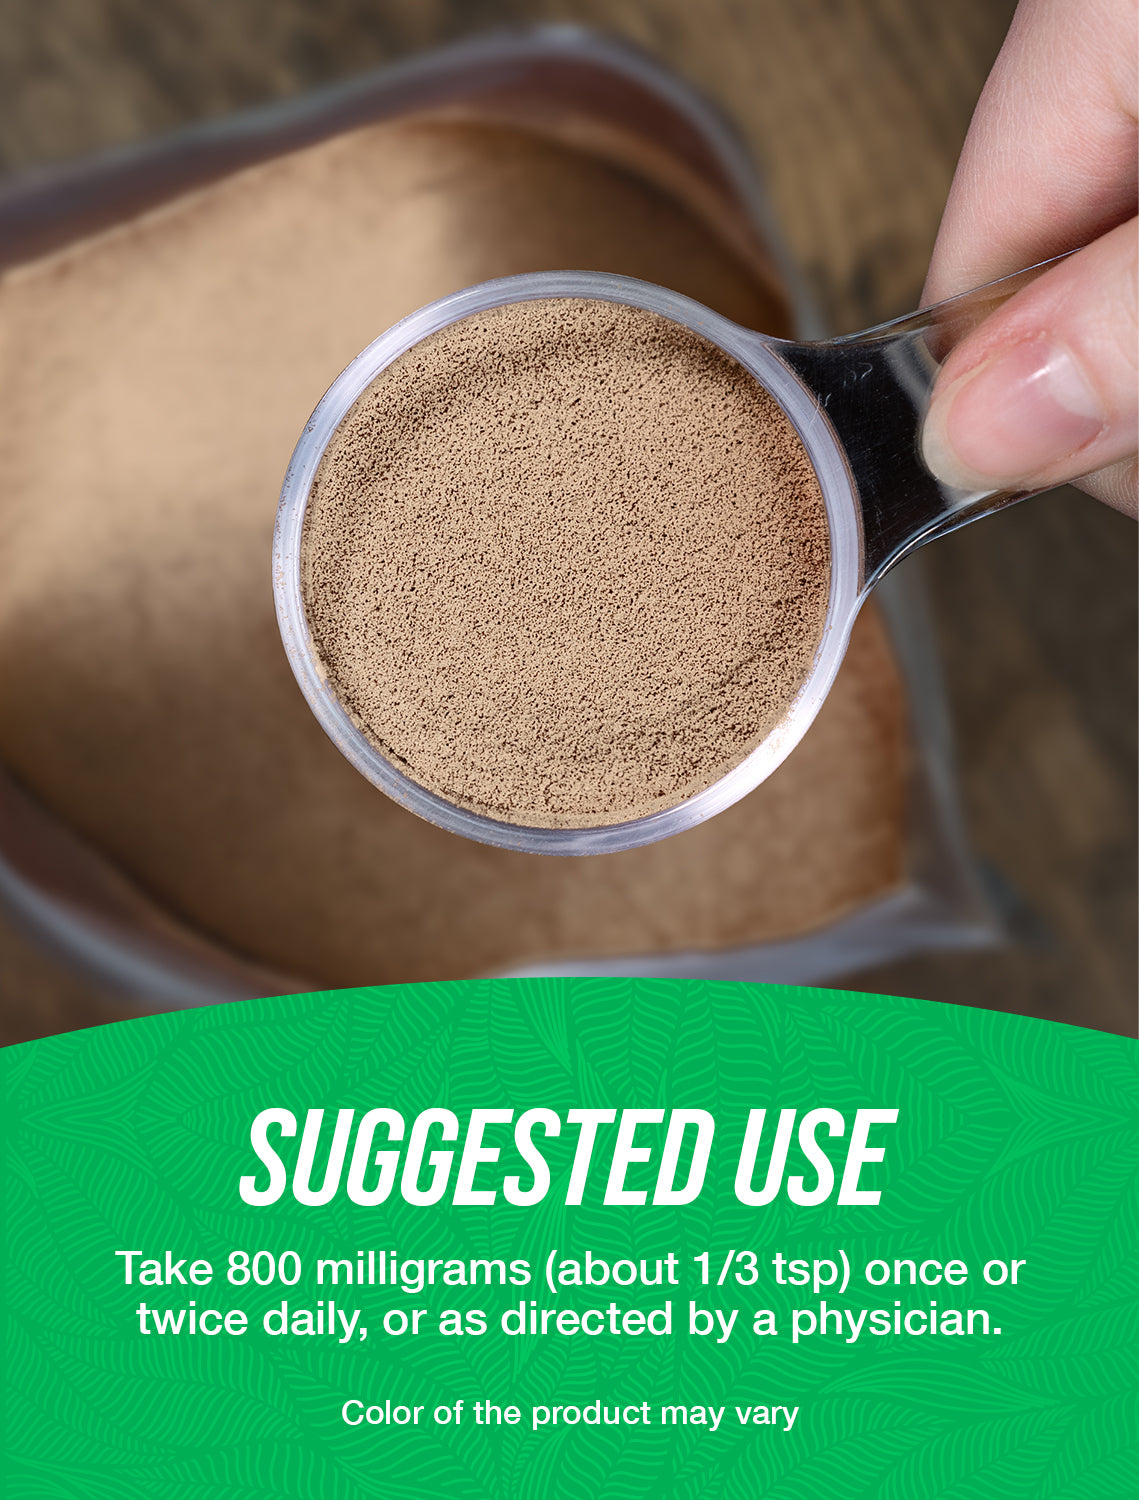 Green Coffee Bean Extract powder suggested use image